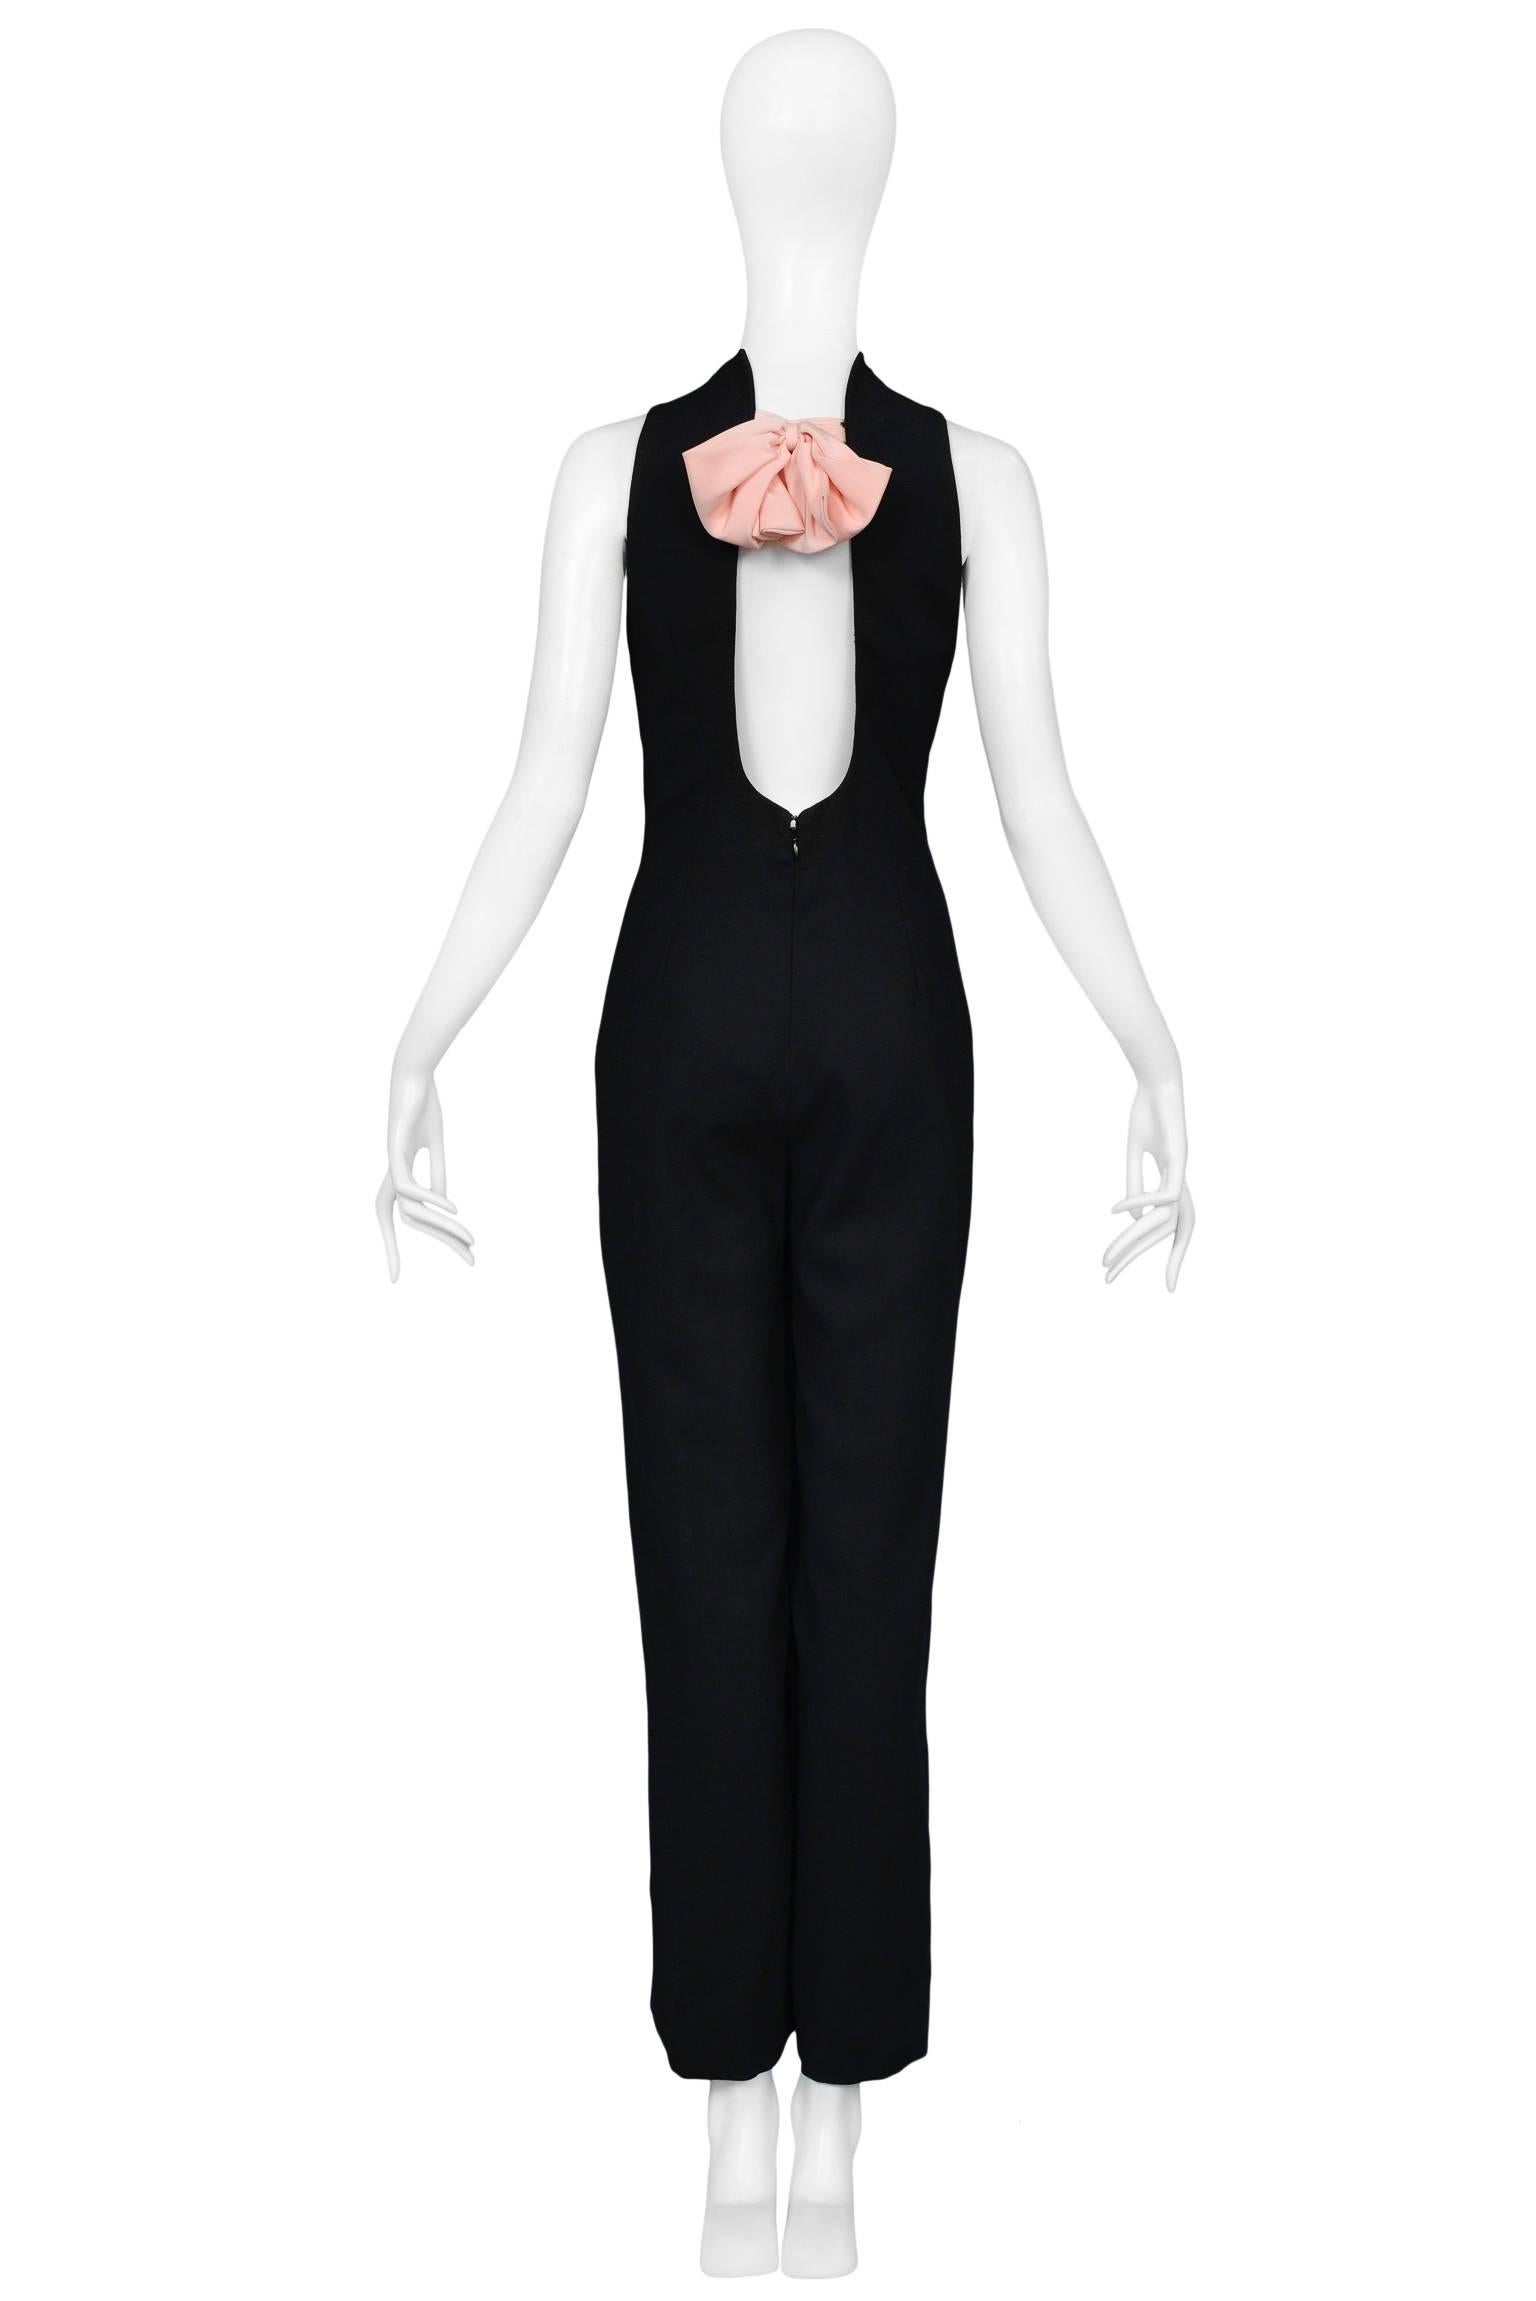 Vintage Gianni Versace designed black evening jumpsuit with an open back and large pink bow. The sleeveless jumpsuit features a tailored torso, scallop neckline, and horizontal tabs across the center front of the bodice. Slim and easy trouser